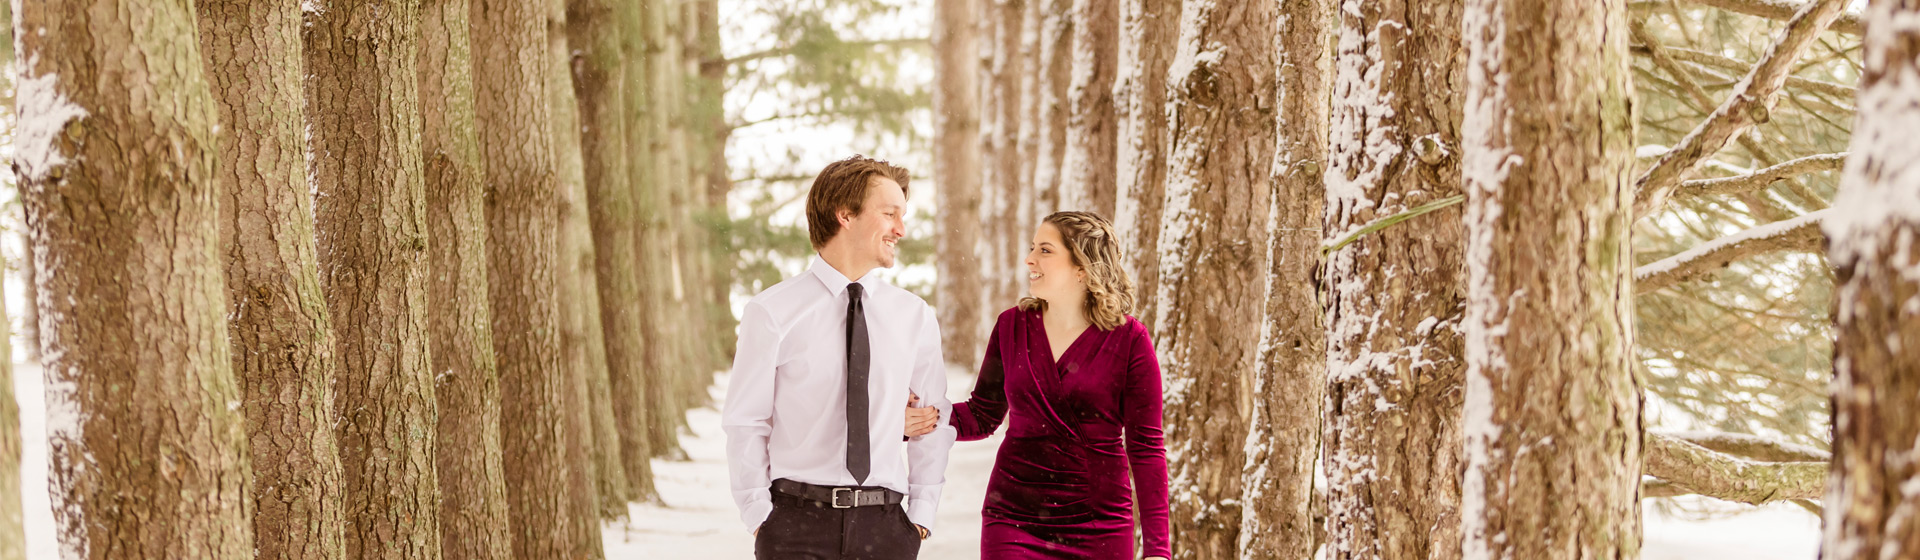 Engaged couple walking through a pine forest